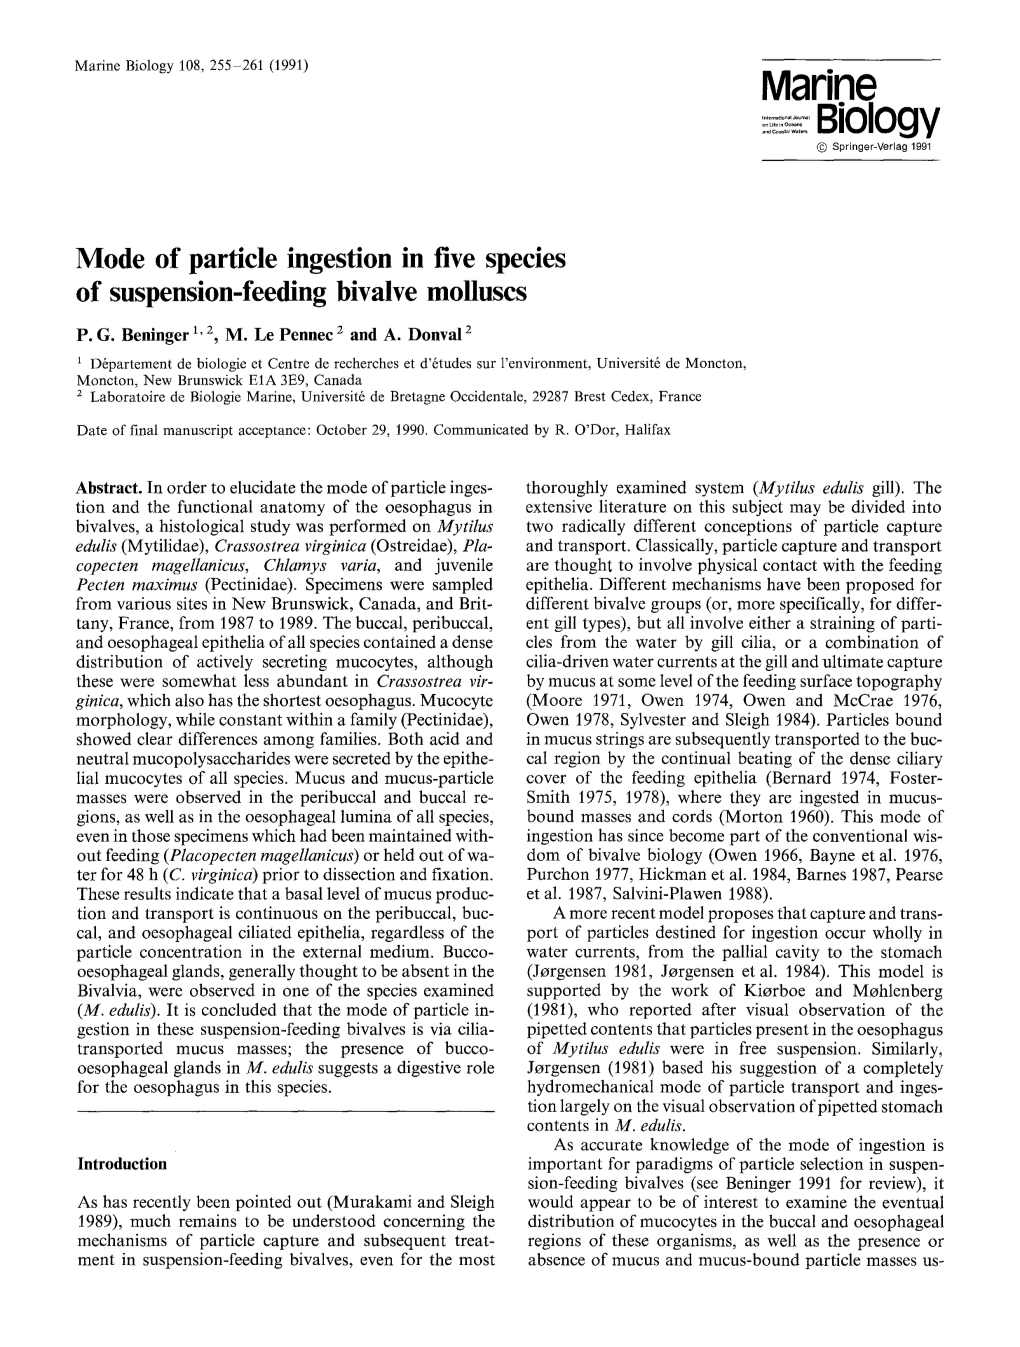 Mode of Particle Ingestion in Five Species of Suspension-Feeding Bivalve Molluscs